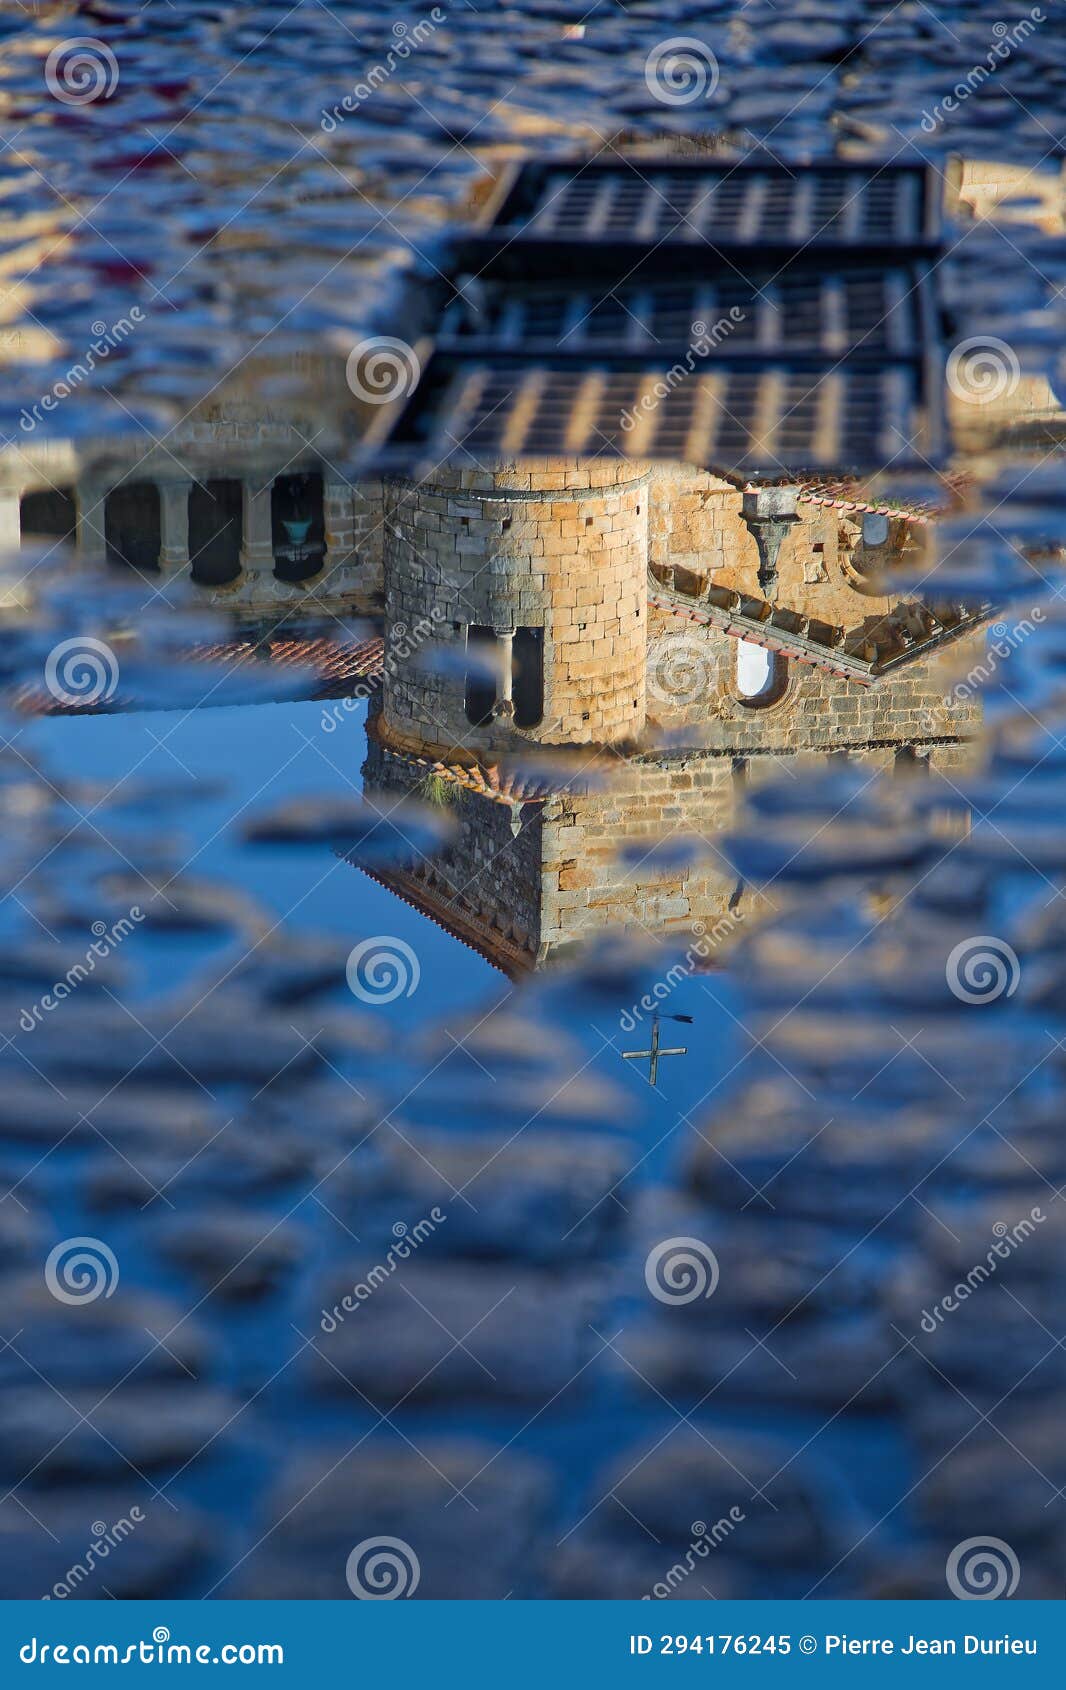 reflection of the bell tower of santillana del mar collegiate church